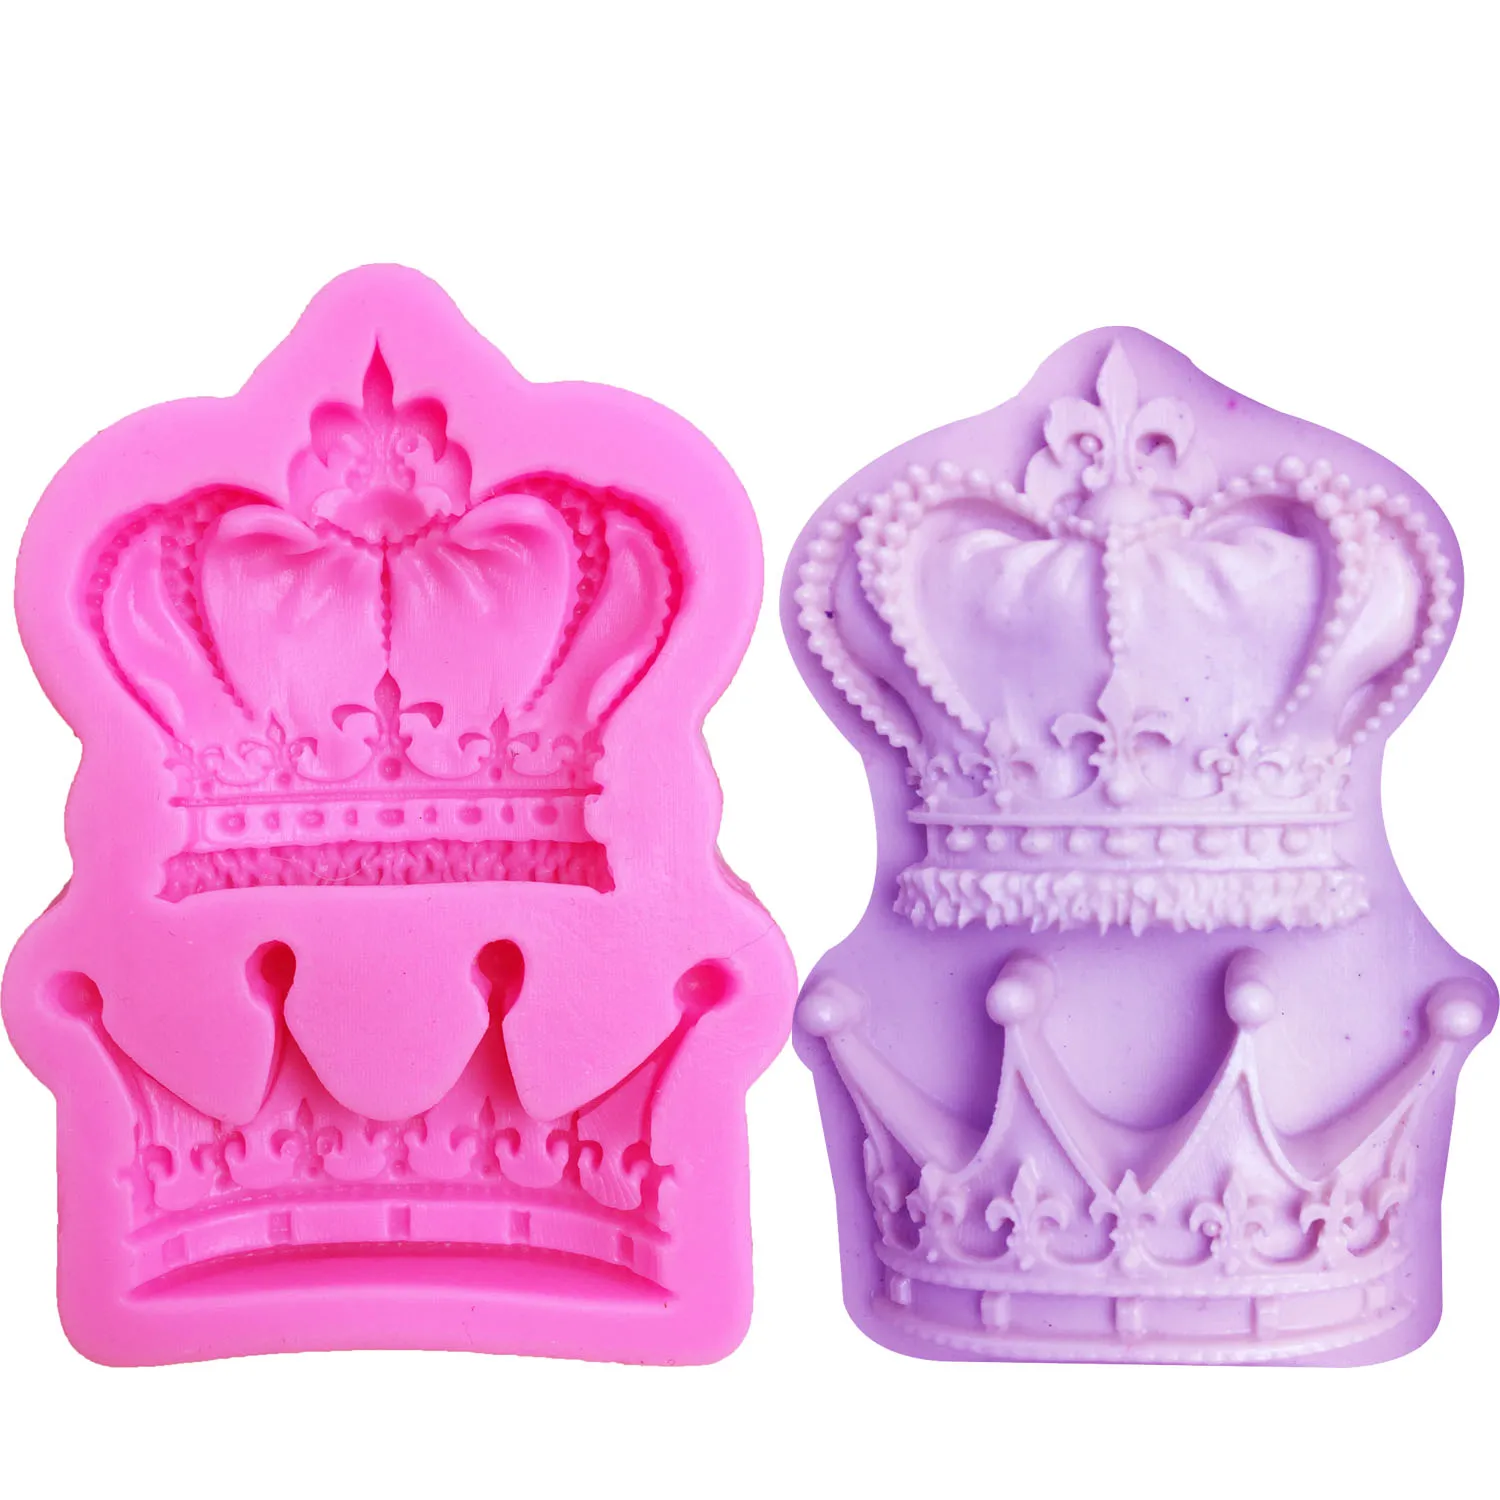 Chocolate mold Silica gel moulds crowns candy mould cake decorating wedding Z0E6 